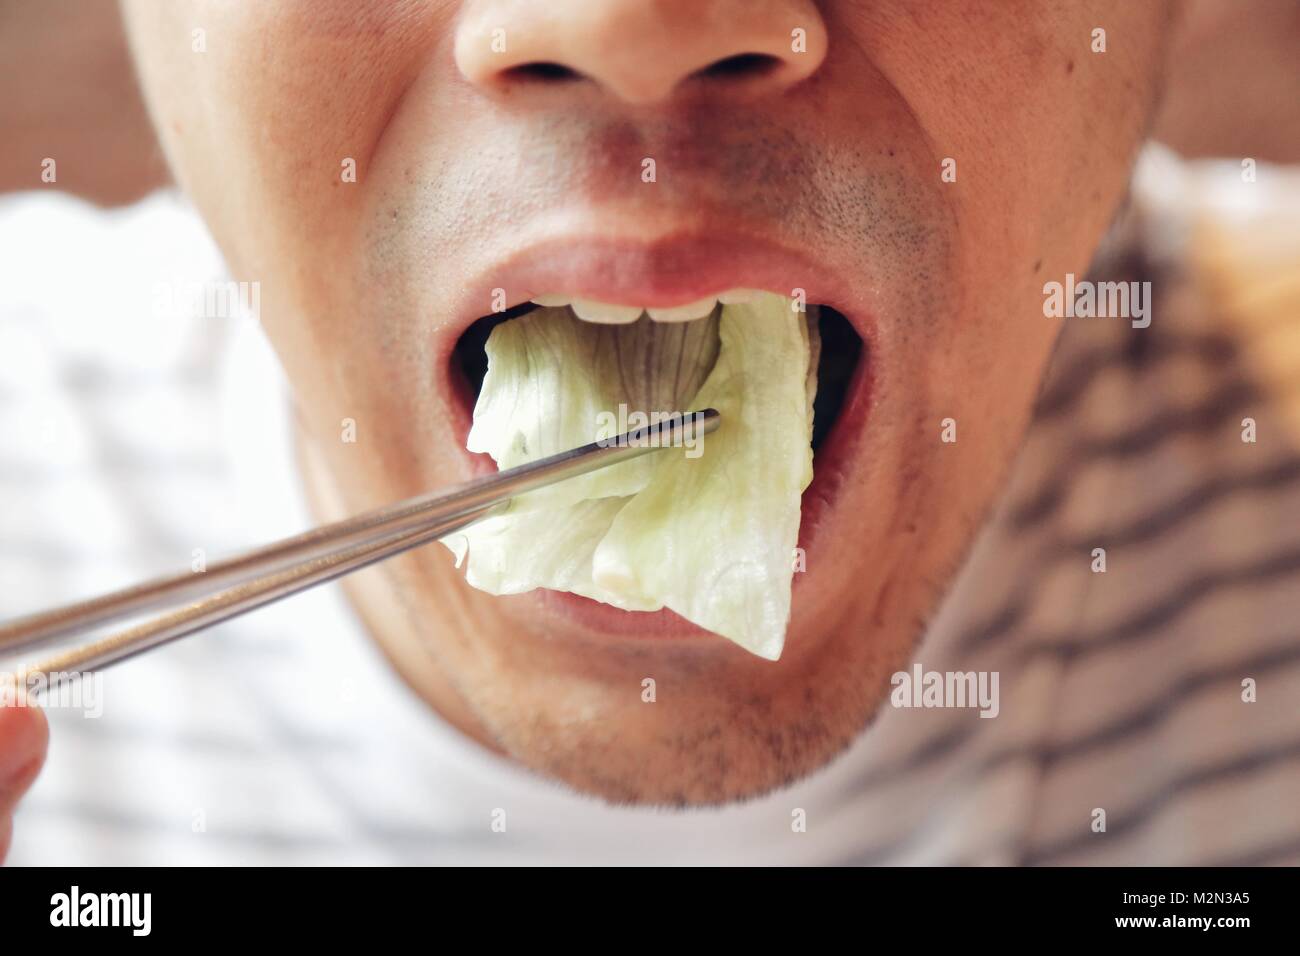 Closeup Asian male eating fresh vegetable food,Napa cabbage, in Chinese style with chopstick. Show concept and idea of healthy. Stock Photo